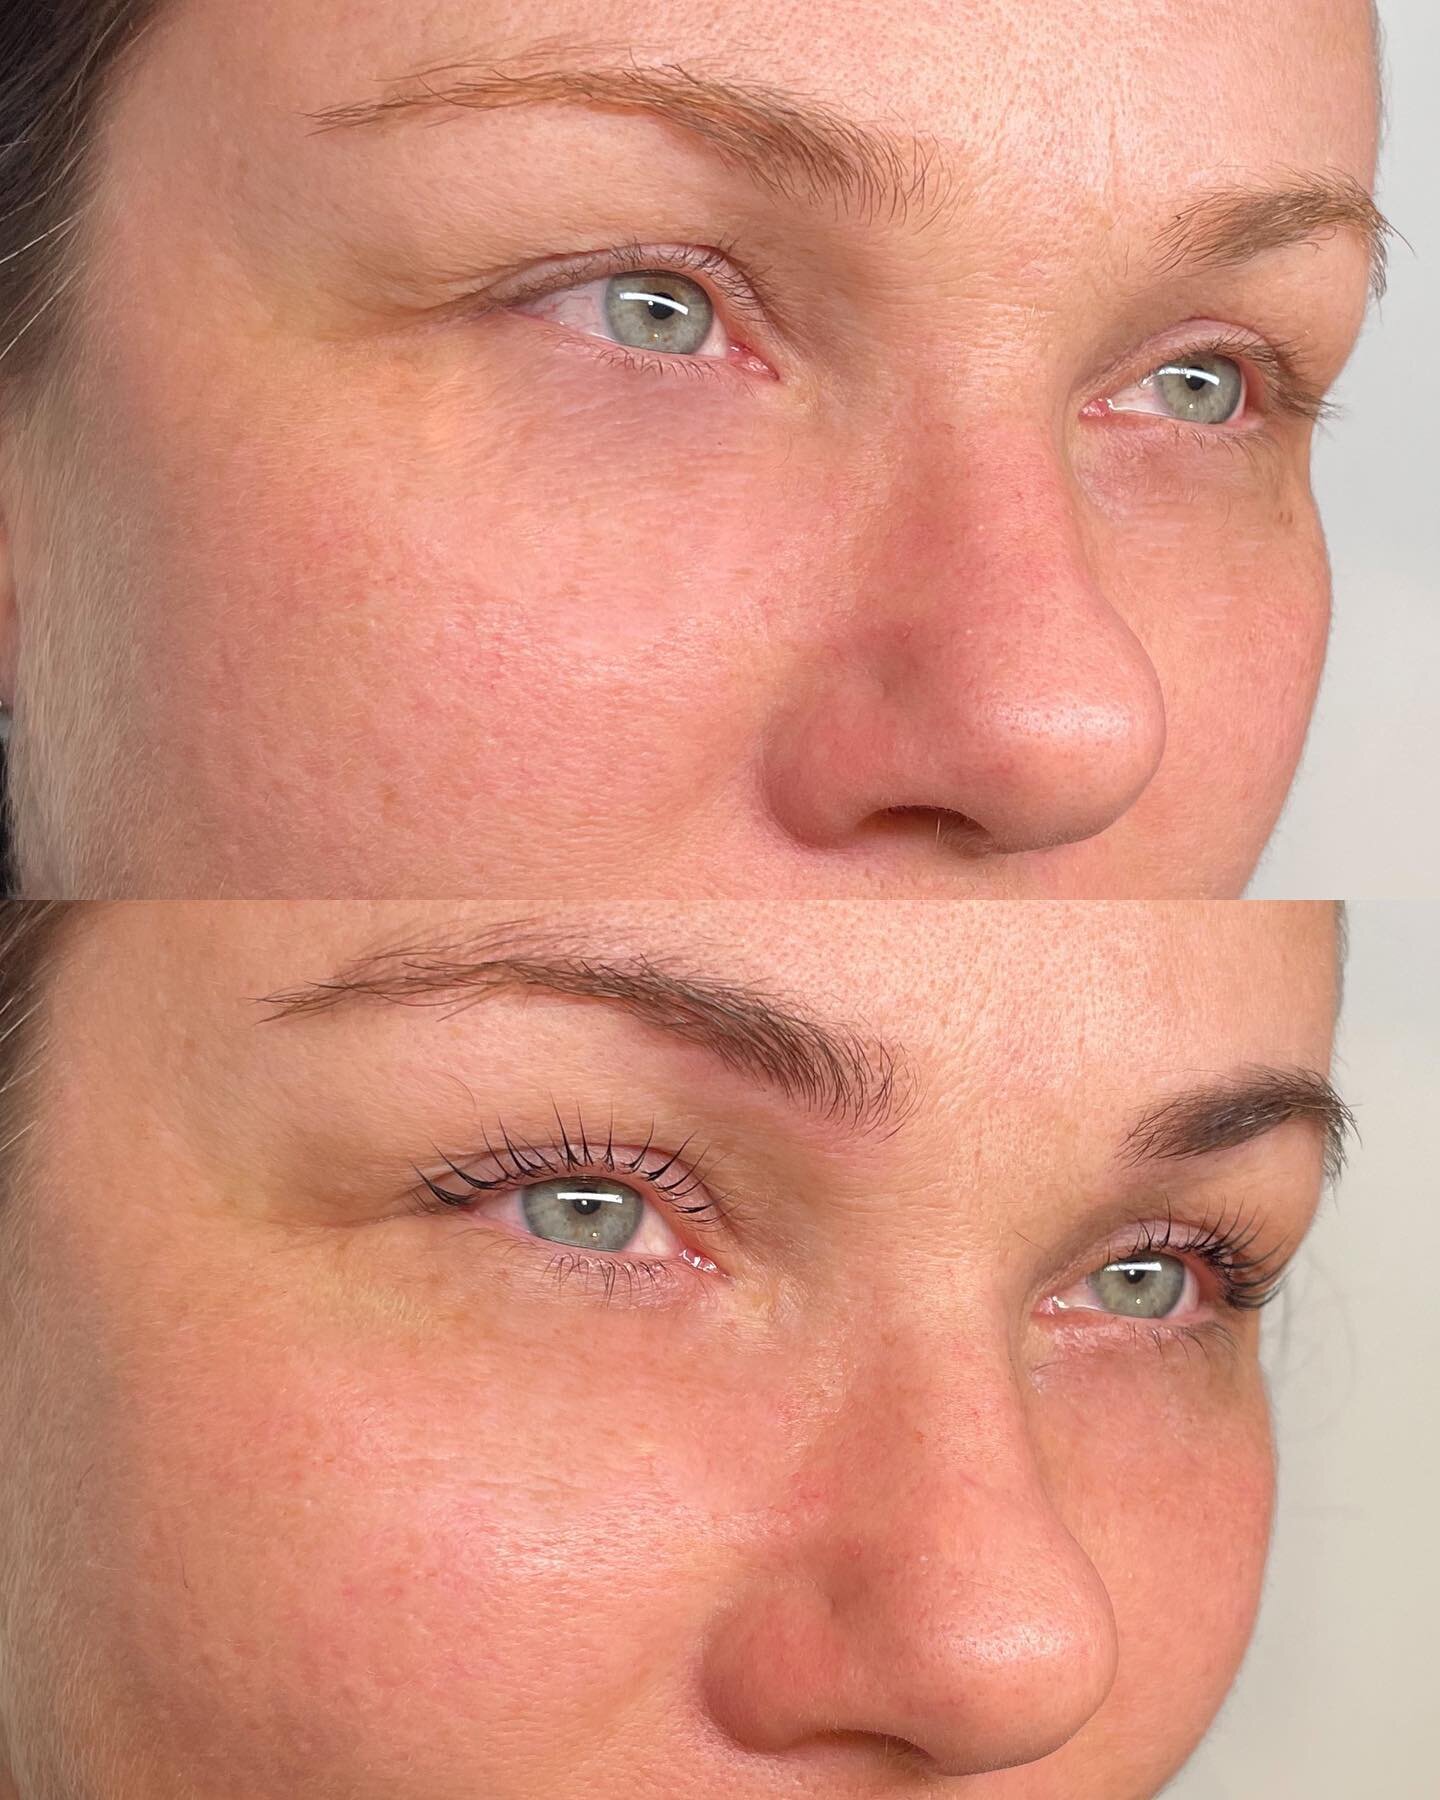 Amazing what a lash lift and tint can do !! Wow&hellip; stunning ! It&rsquo;s such an honour to do what I do ! I just love making women feel confident while focusing on their gorgeous natural attributes ! I mean those eyes 👀 stunner 😍

.
.
.
.
.
.
